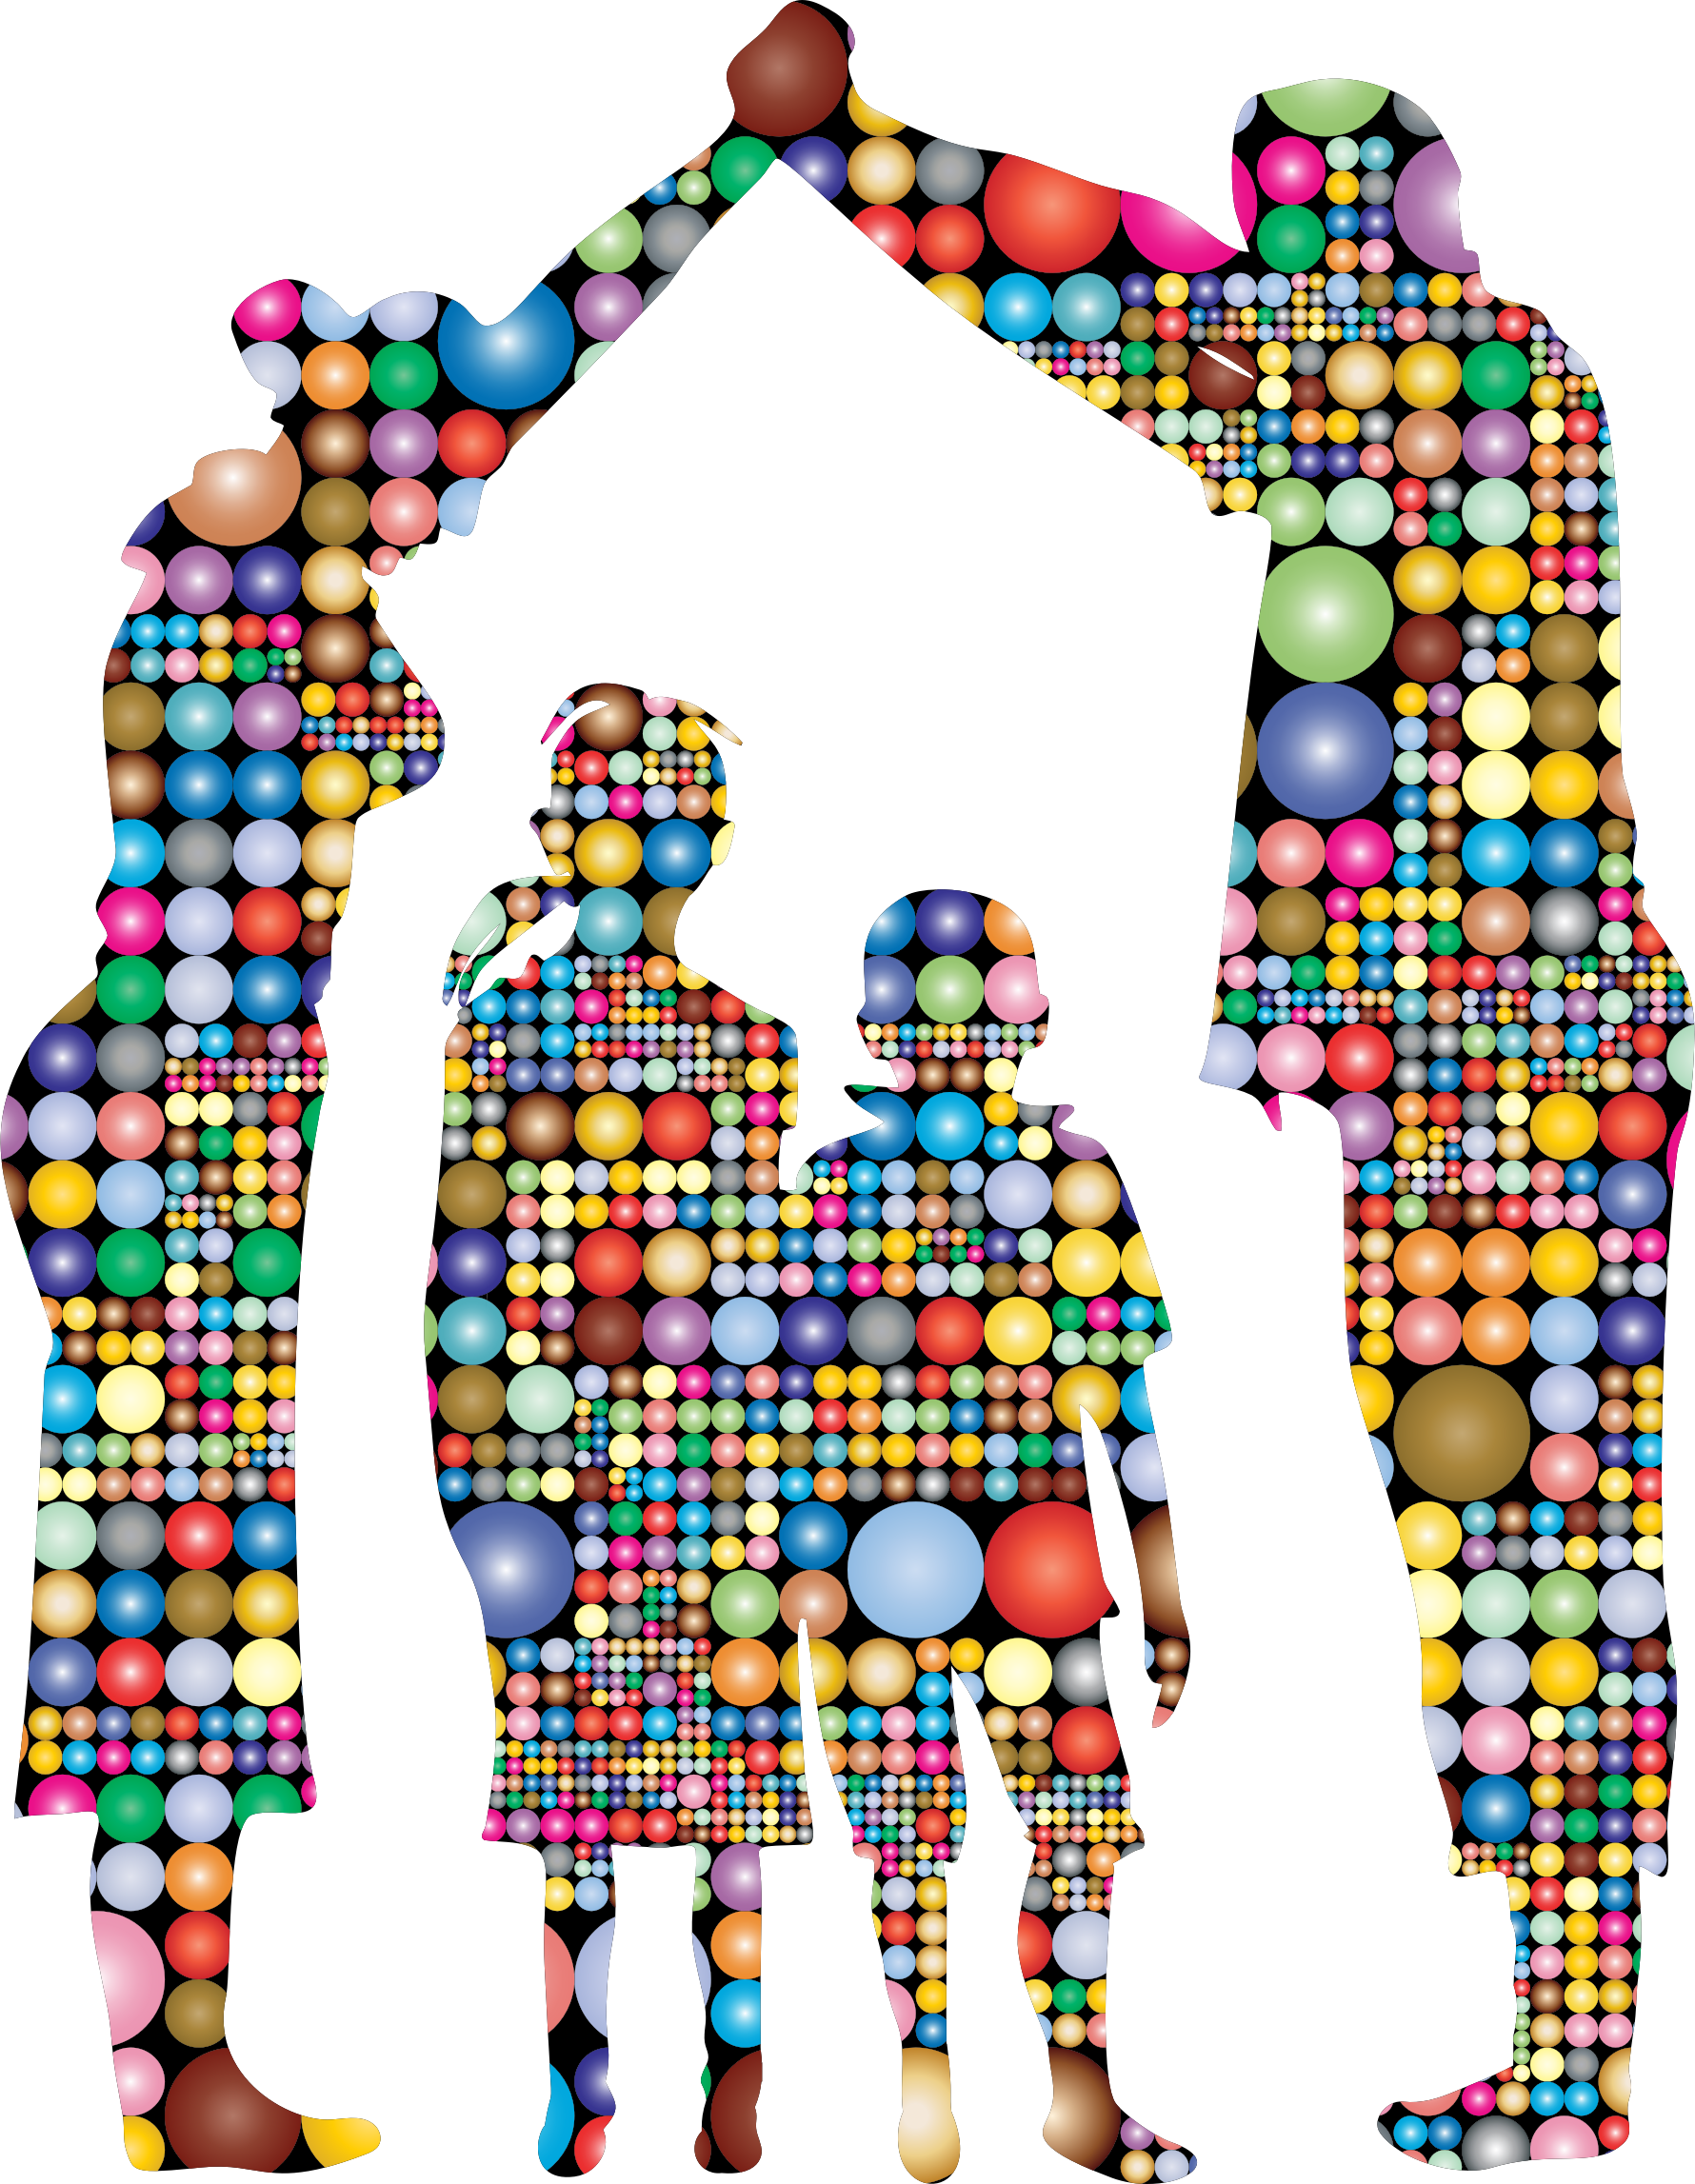 Download Family made of Prismatic Circles vector clipart image - Free stock photo - Public Domain photo ...